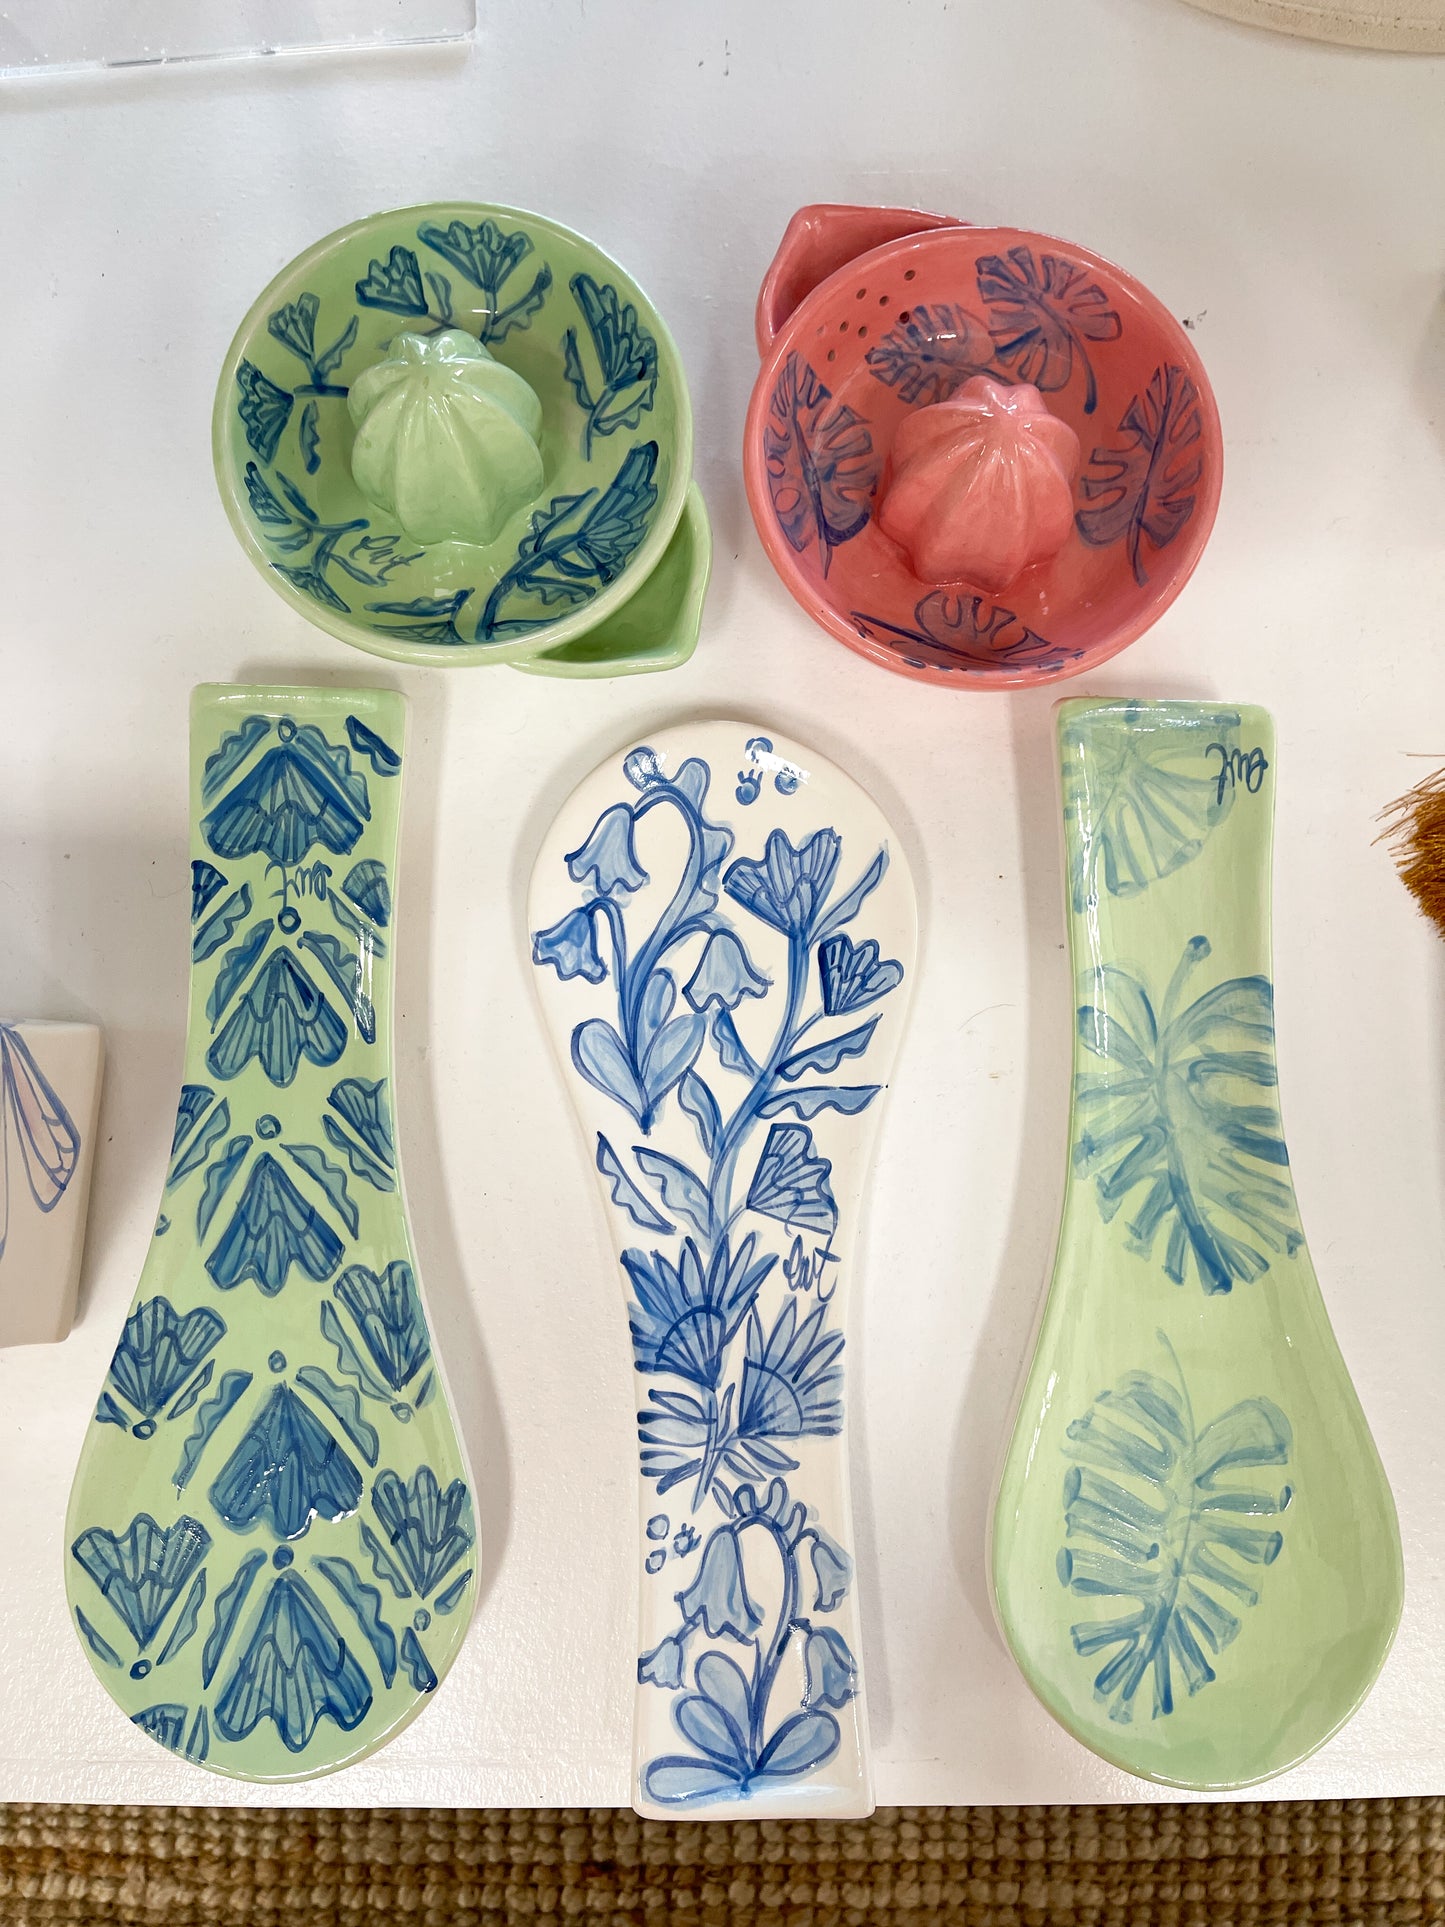 Painting Workshop June 12th- Ceramic Juicer and Spoon Rest